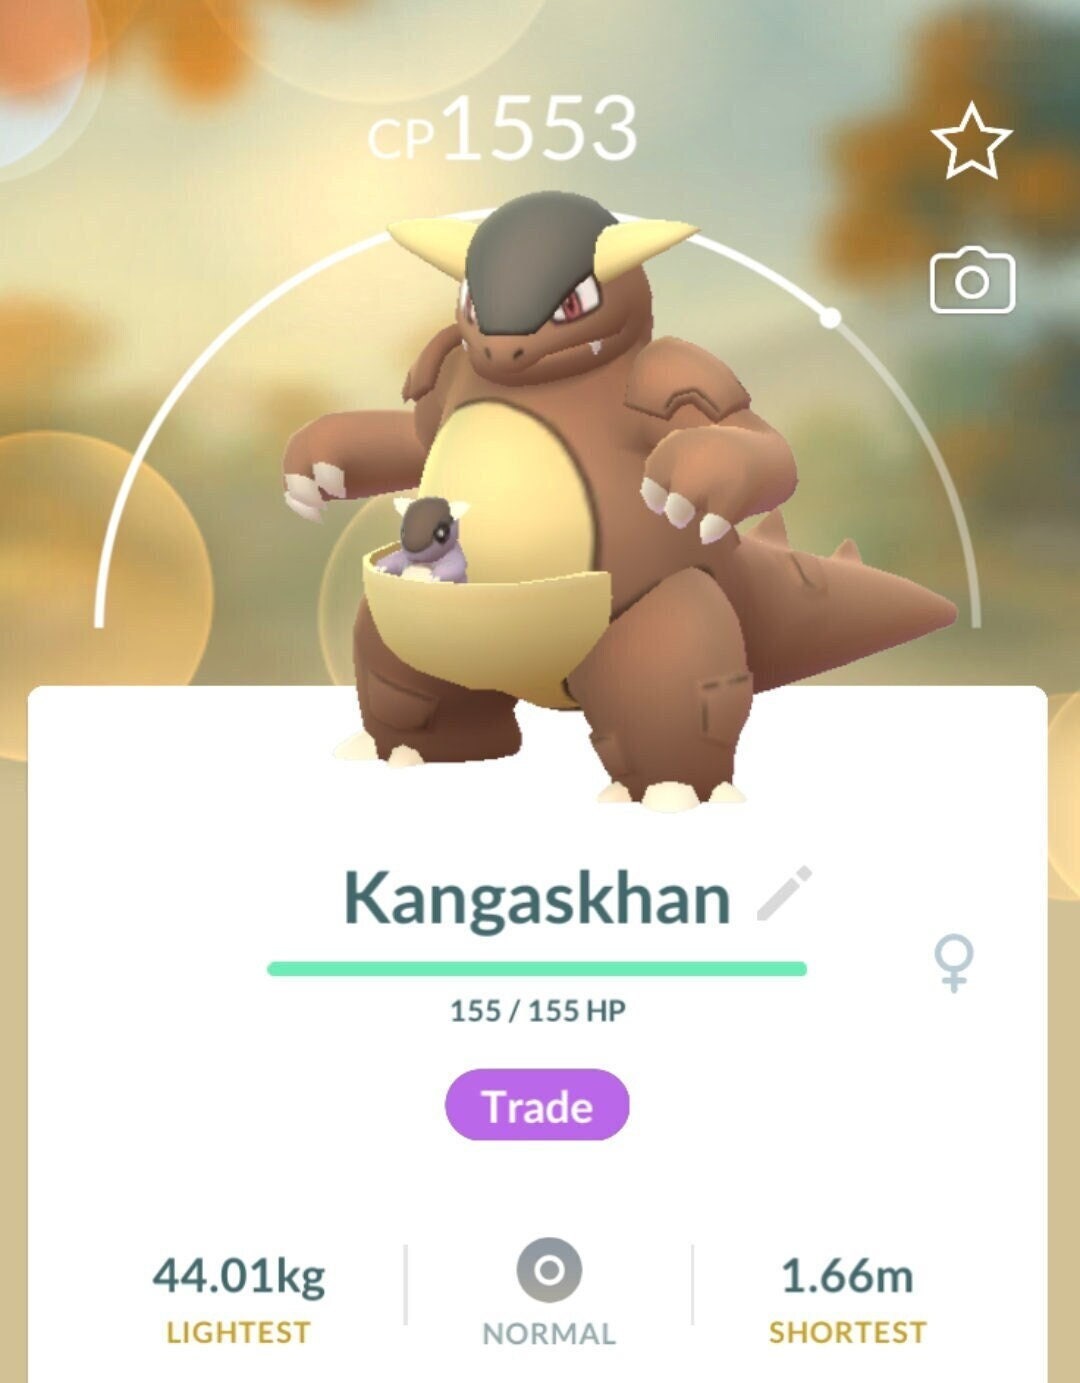 Pokemon Sword And Shield Shiny Kangaskhan 6IV Battle Ready Fast Delivery